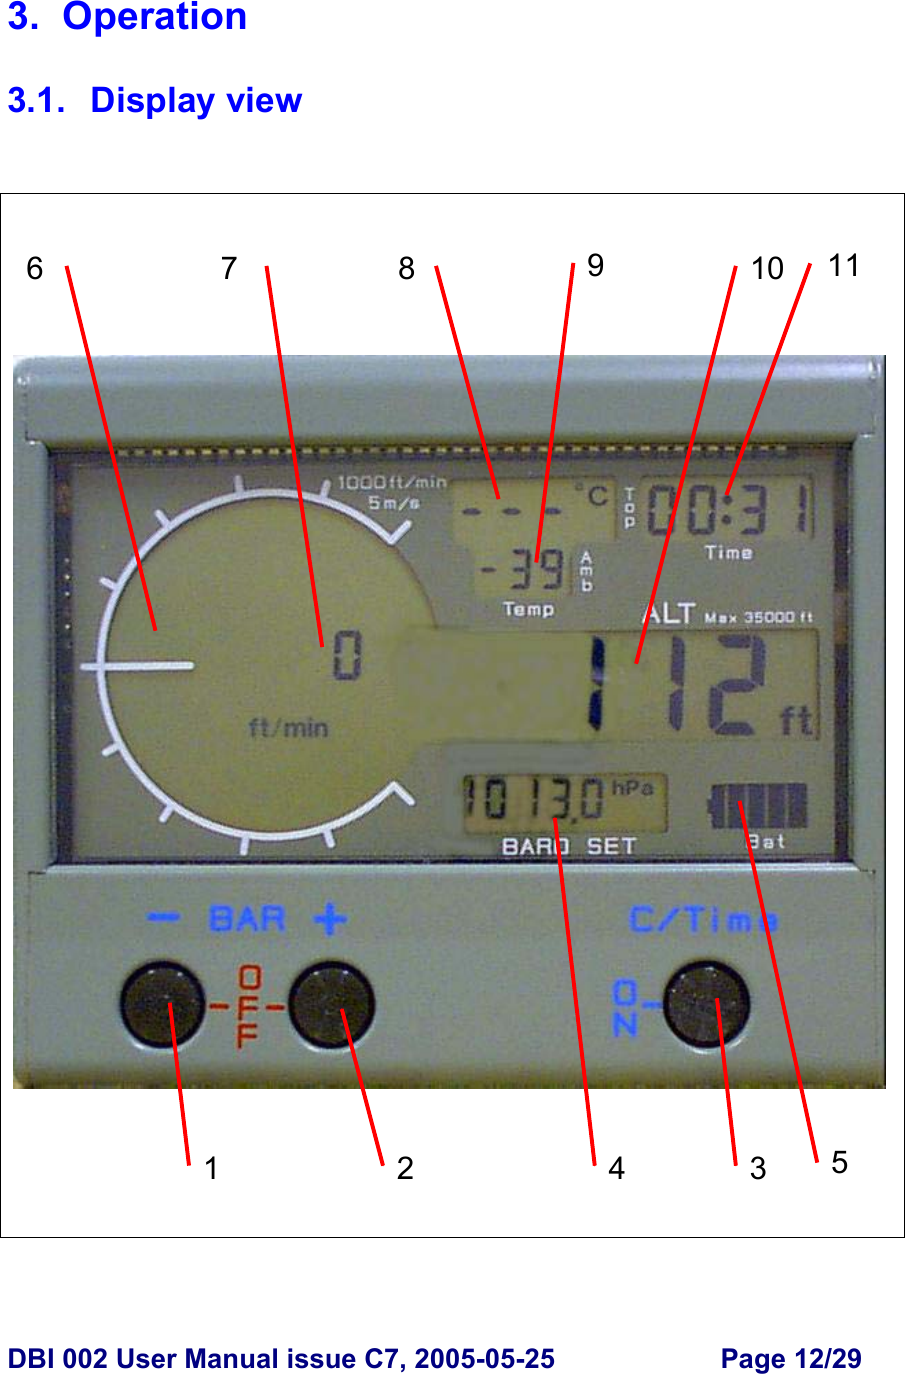  DBI 002 User Manual issue C7, 2005-05-25  Page 12/29  3. Operation  3.1. Display view    1  23 46  7  8910  11523 4